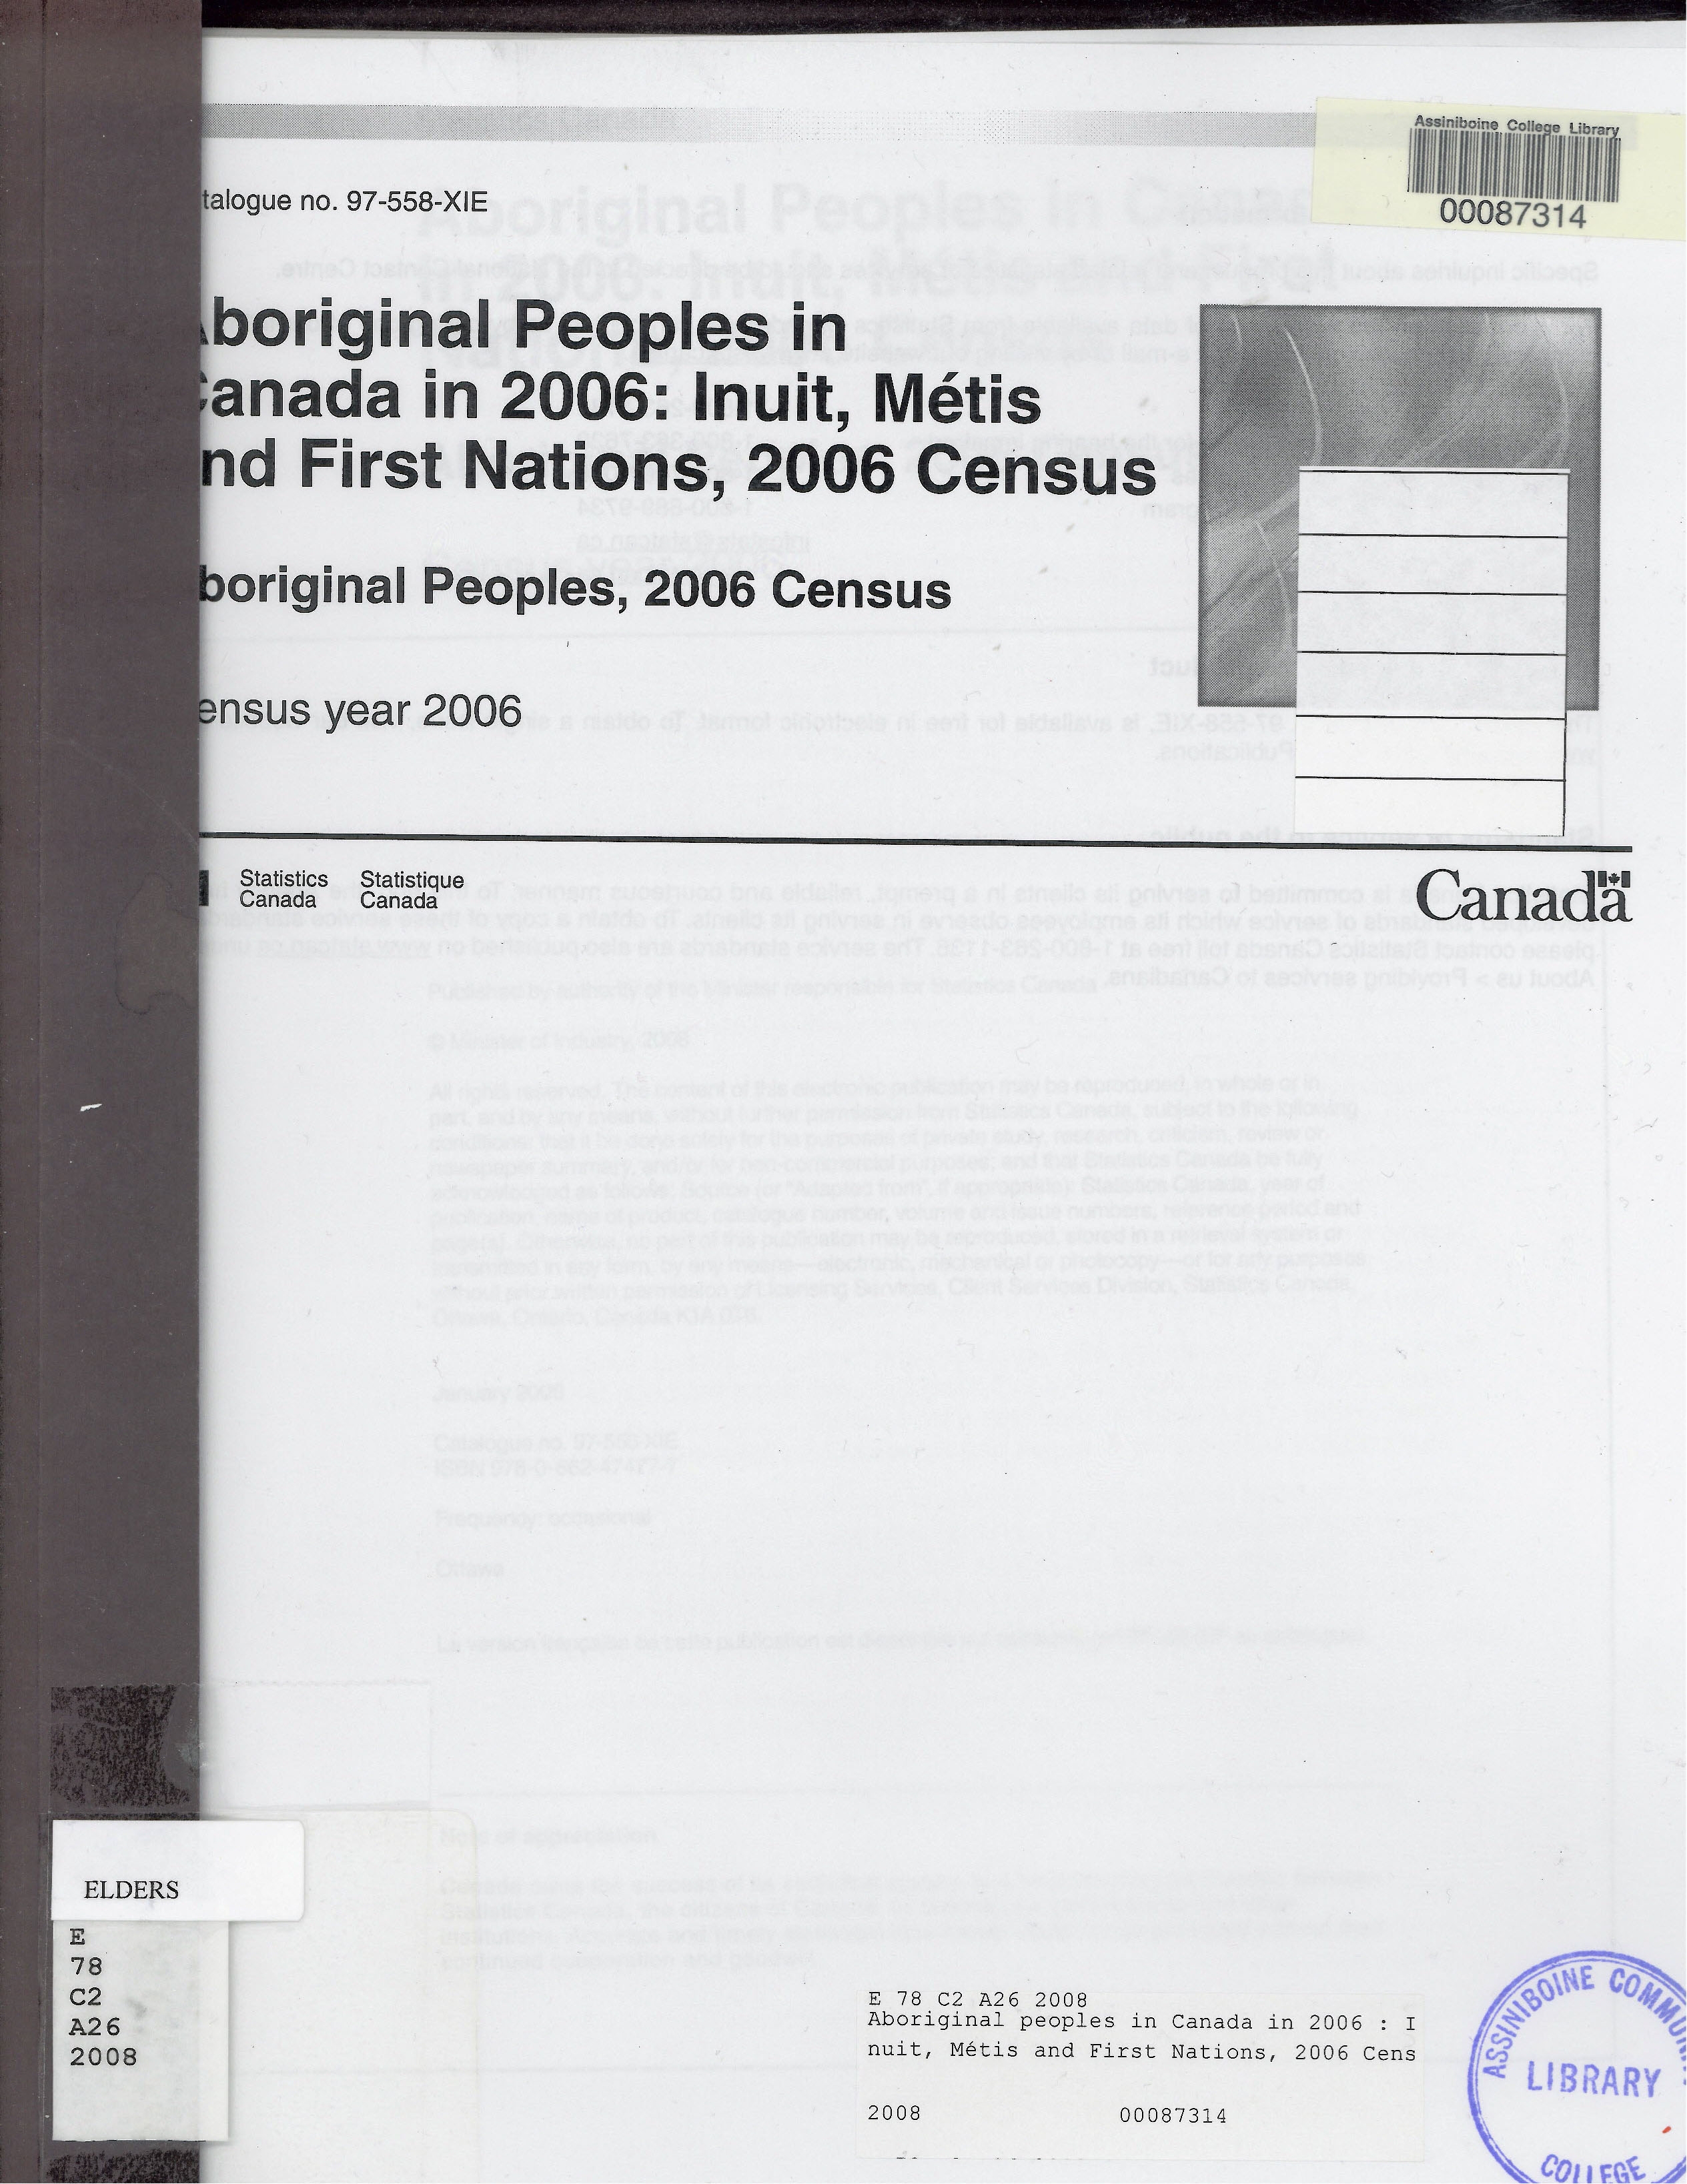 Aboriginal peoples in Canada in 2006 : Inuit, Métis and First Nations, 2006 Census.